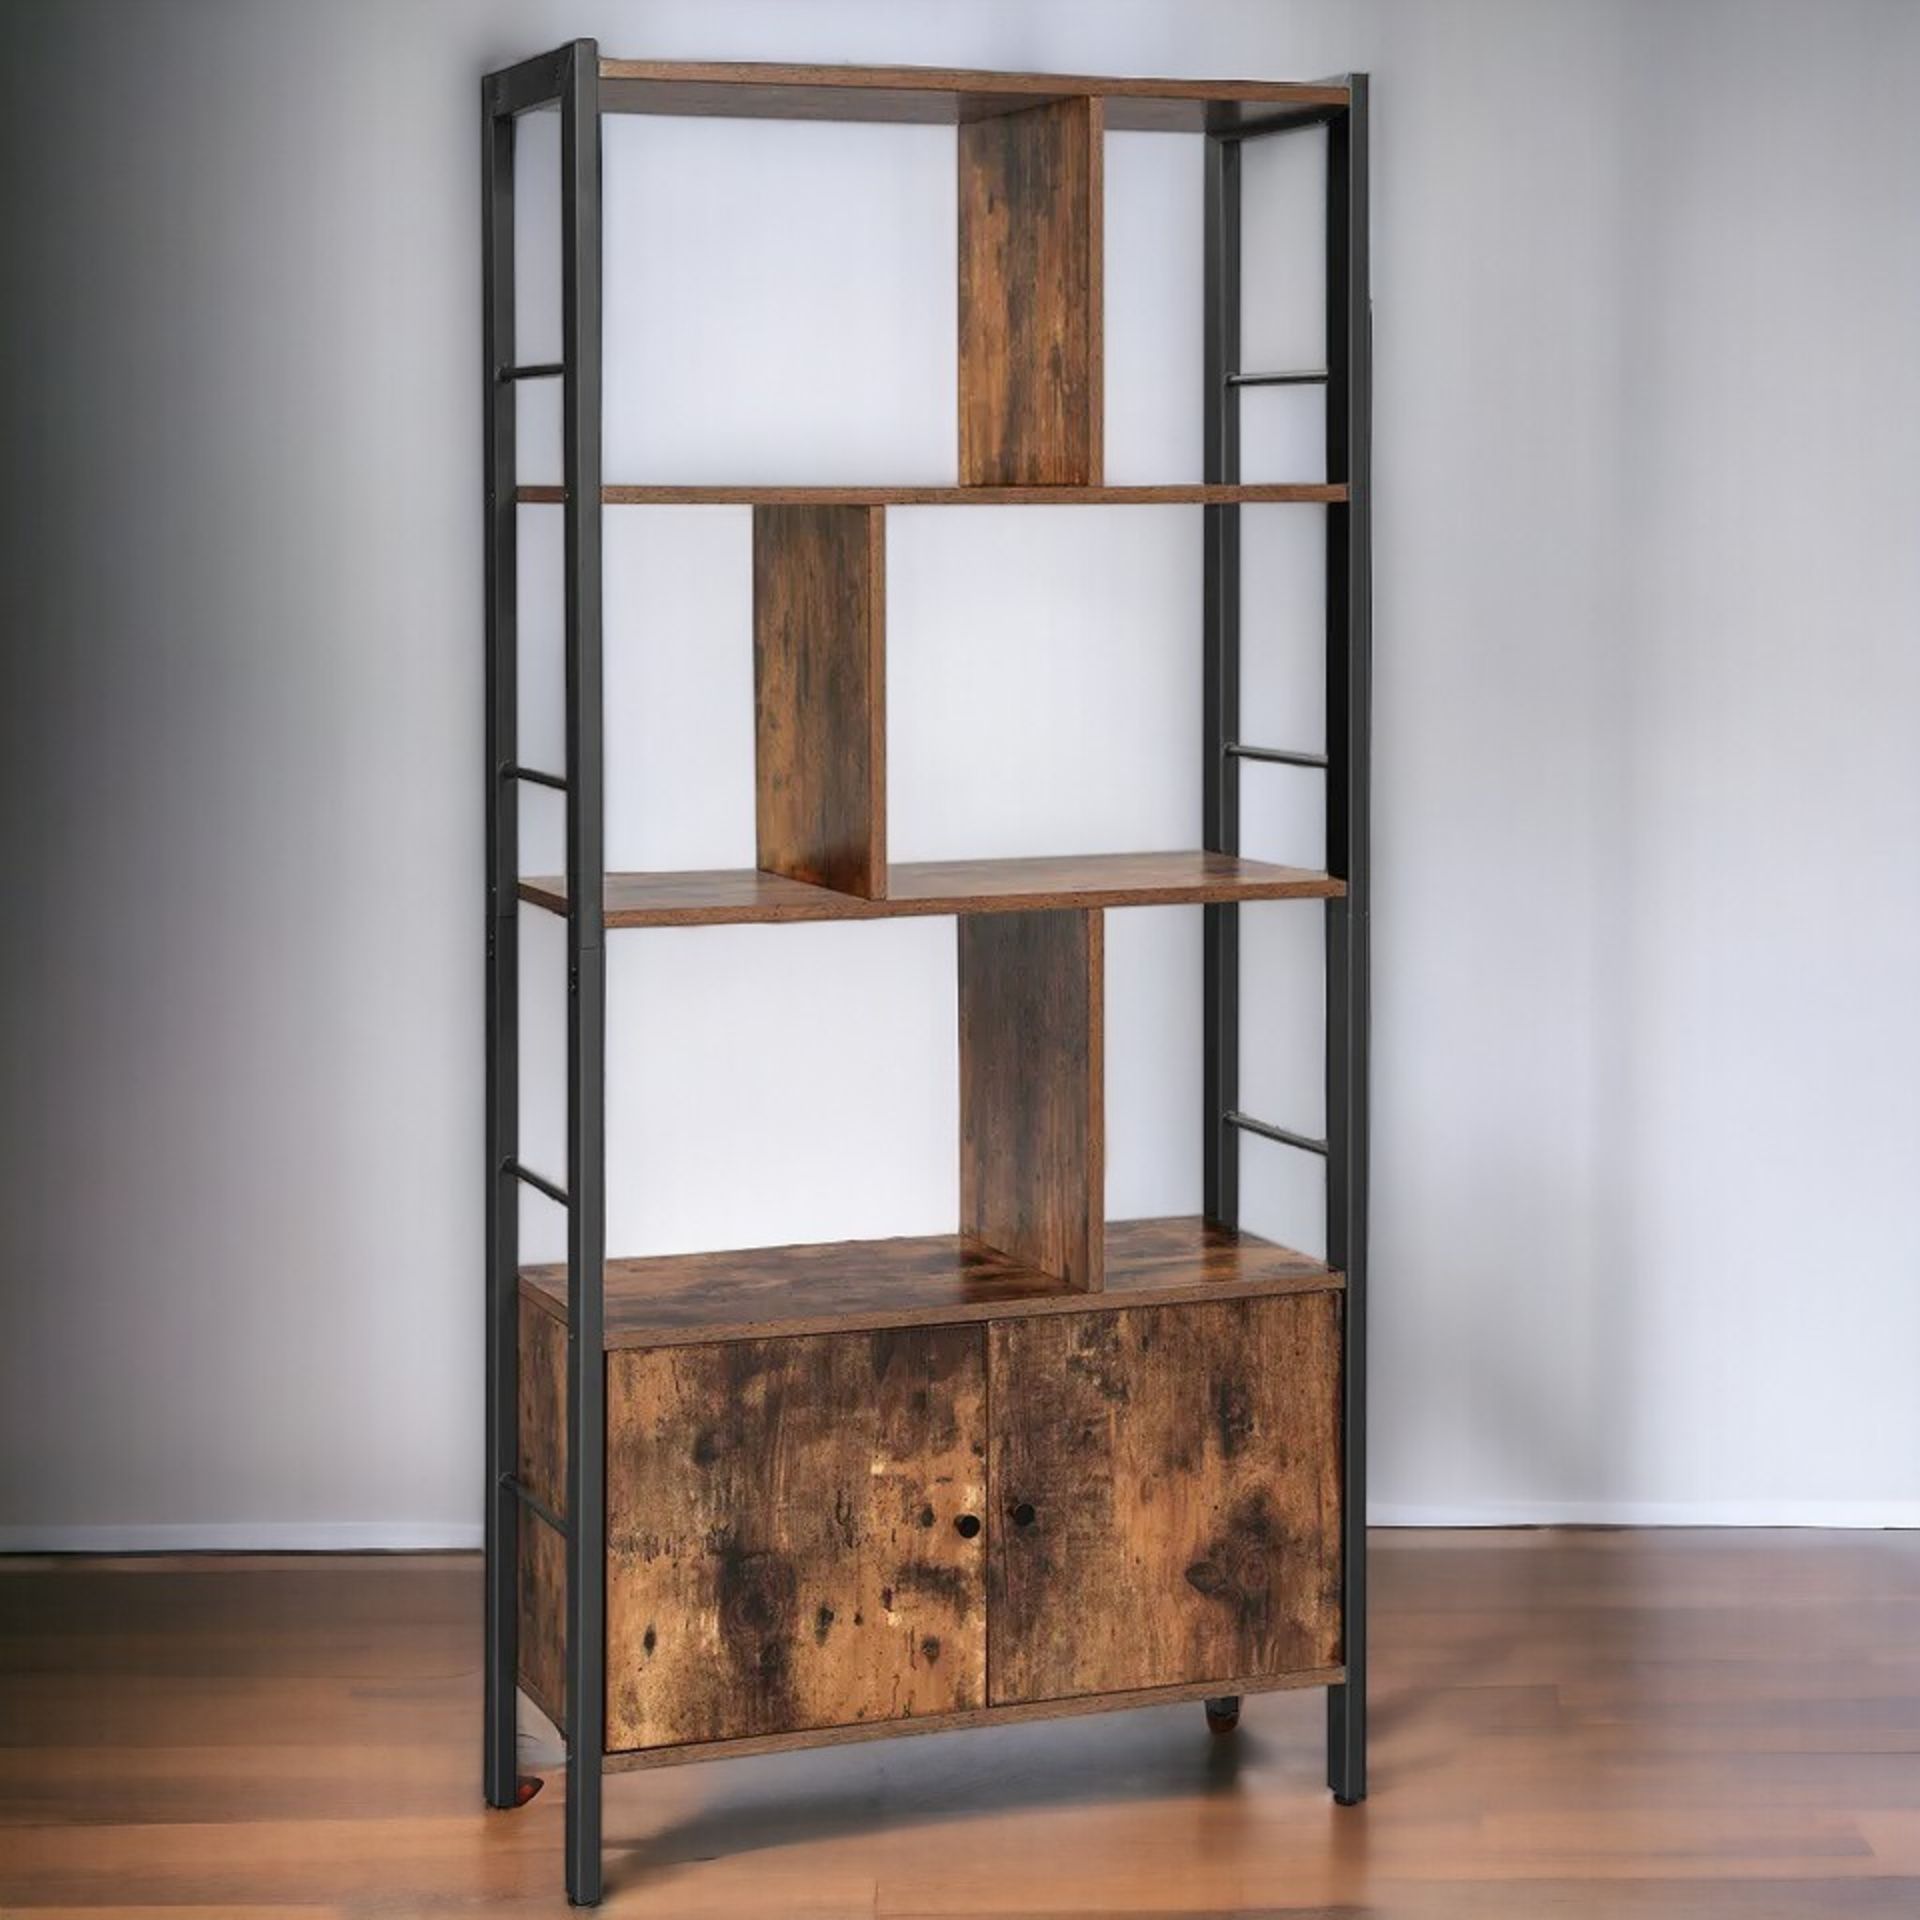 FREE DELIVERY - BRAND NEW RETRO BOOKCASE 4-TIER SHELVING UNIT DISPLAY PLANT STAND